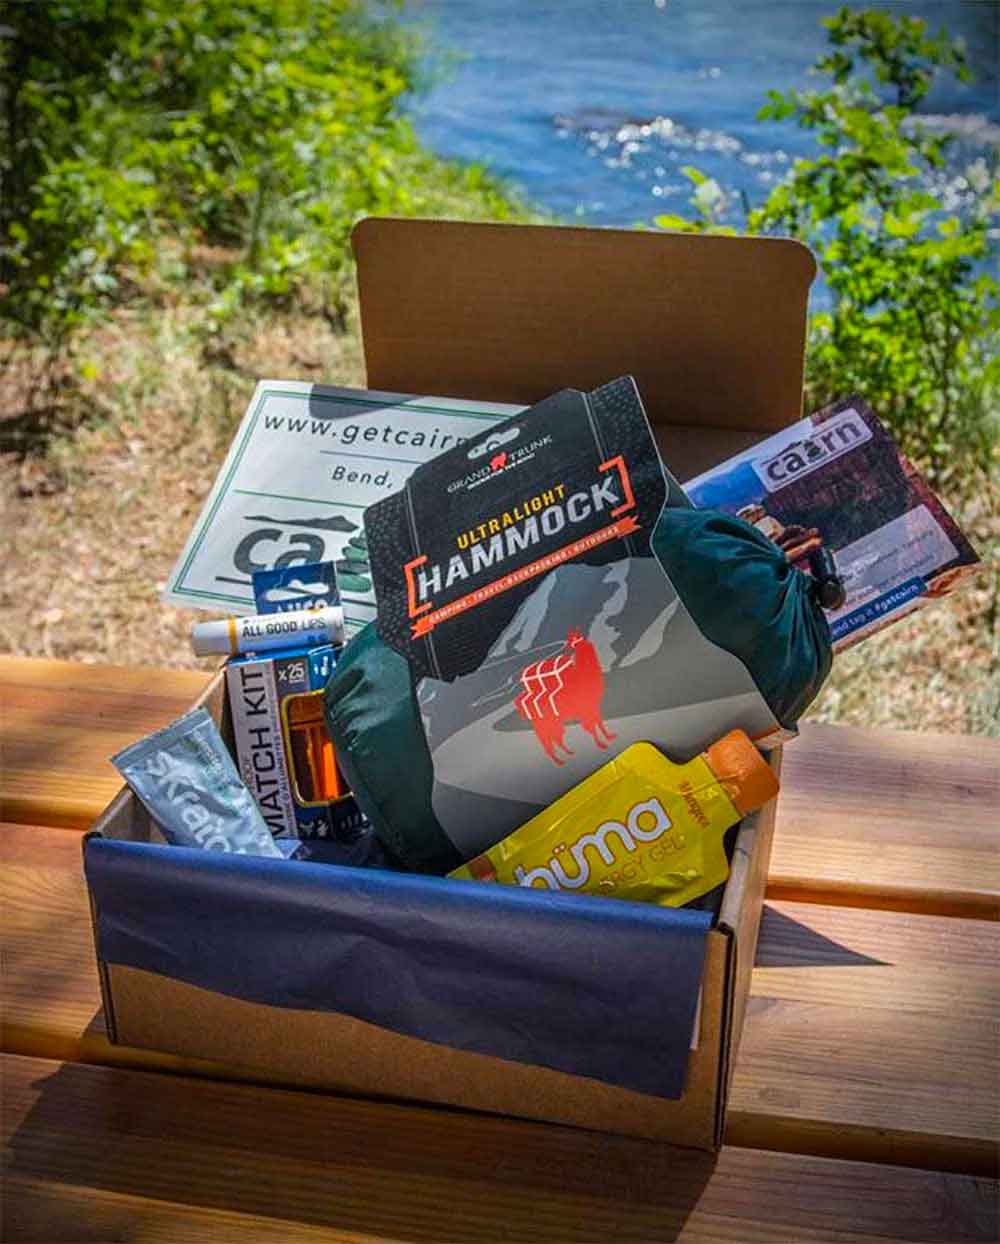 example of the cool outdoor gear that comes in one of Cairns subscription boxes